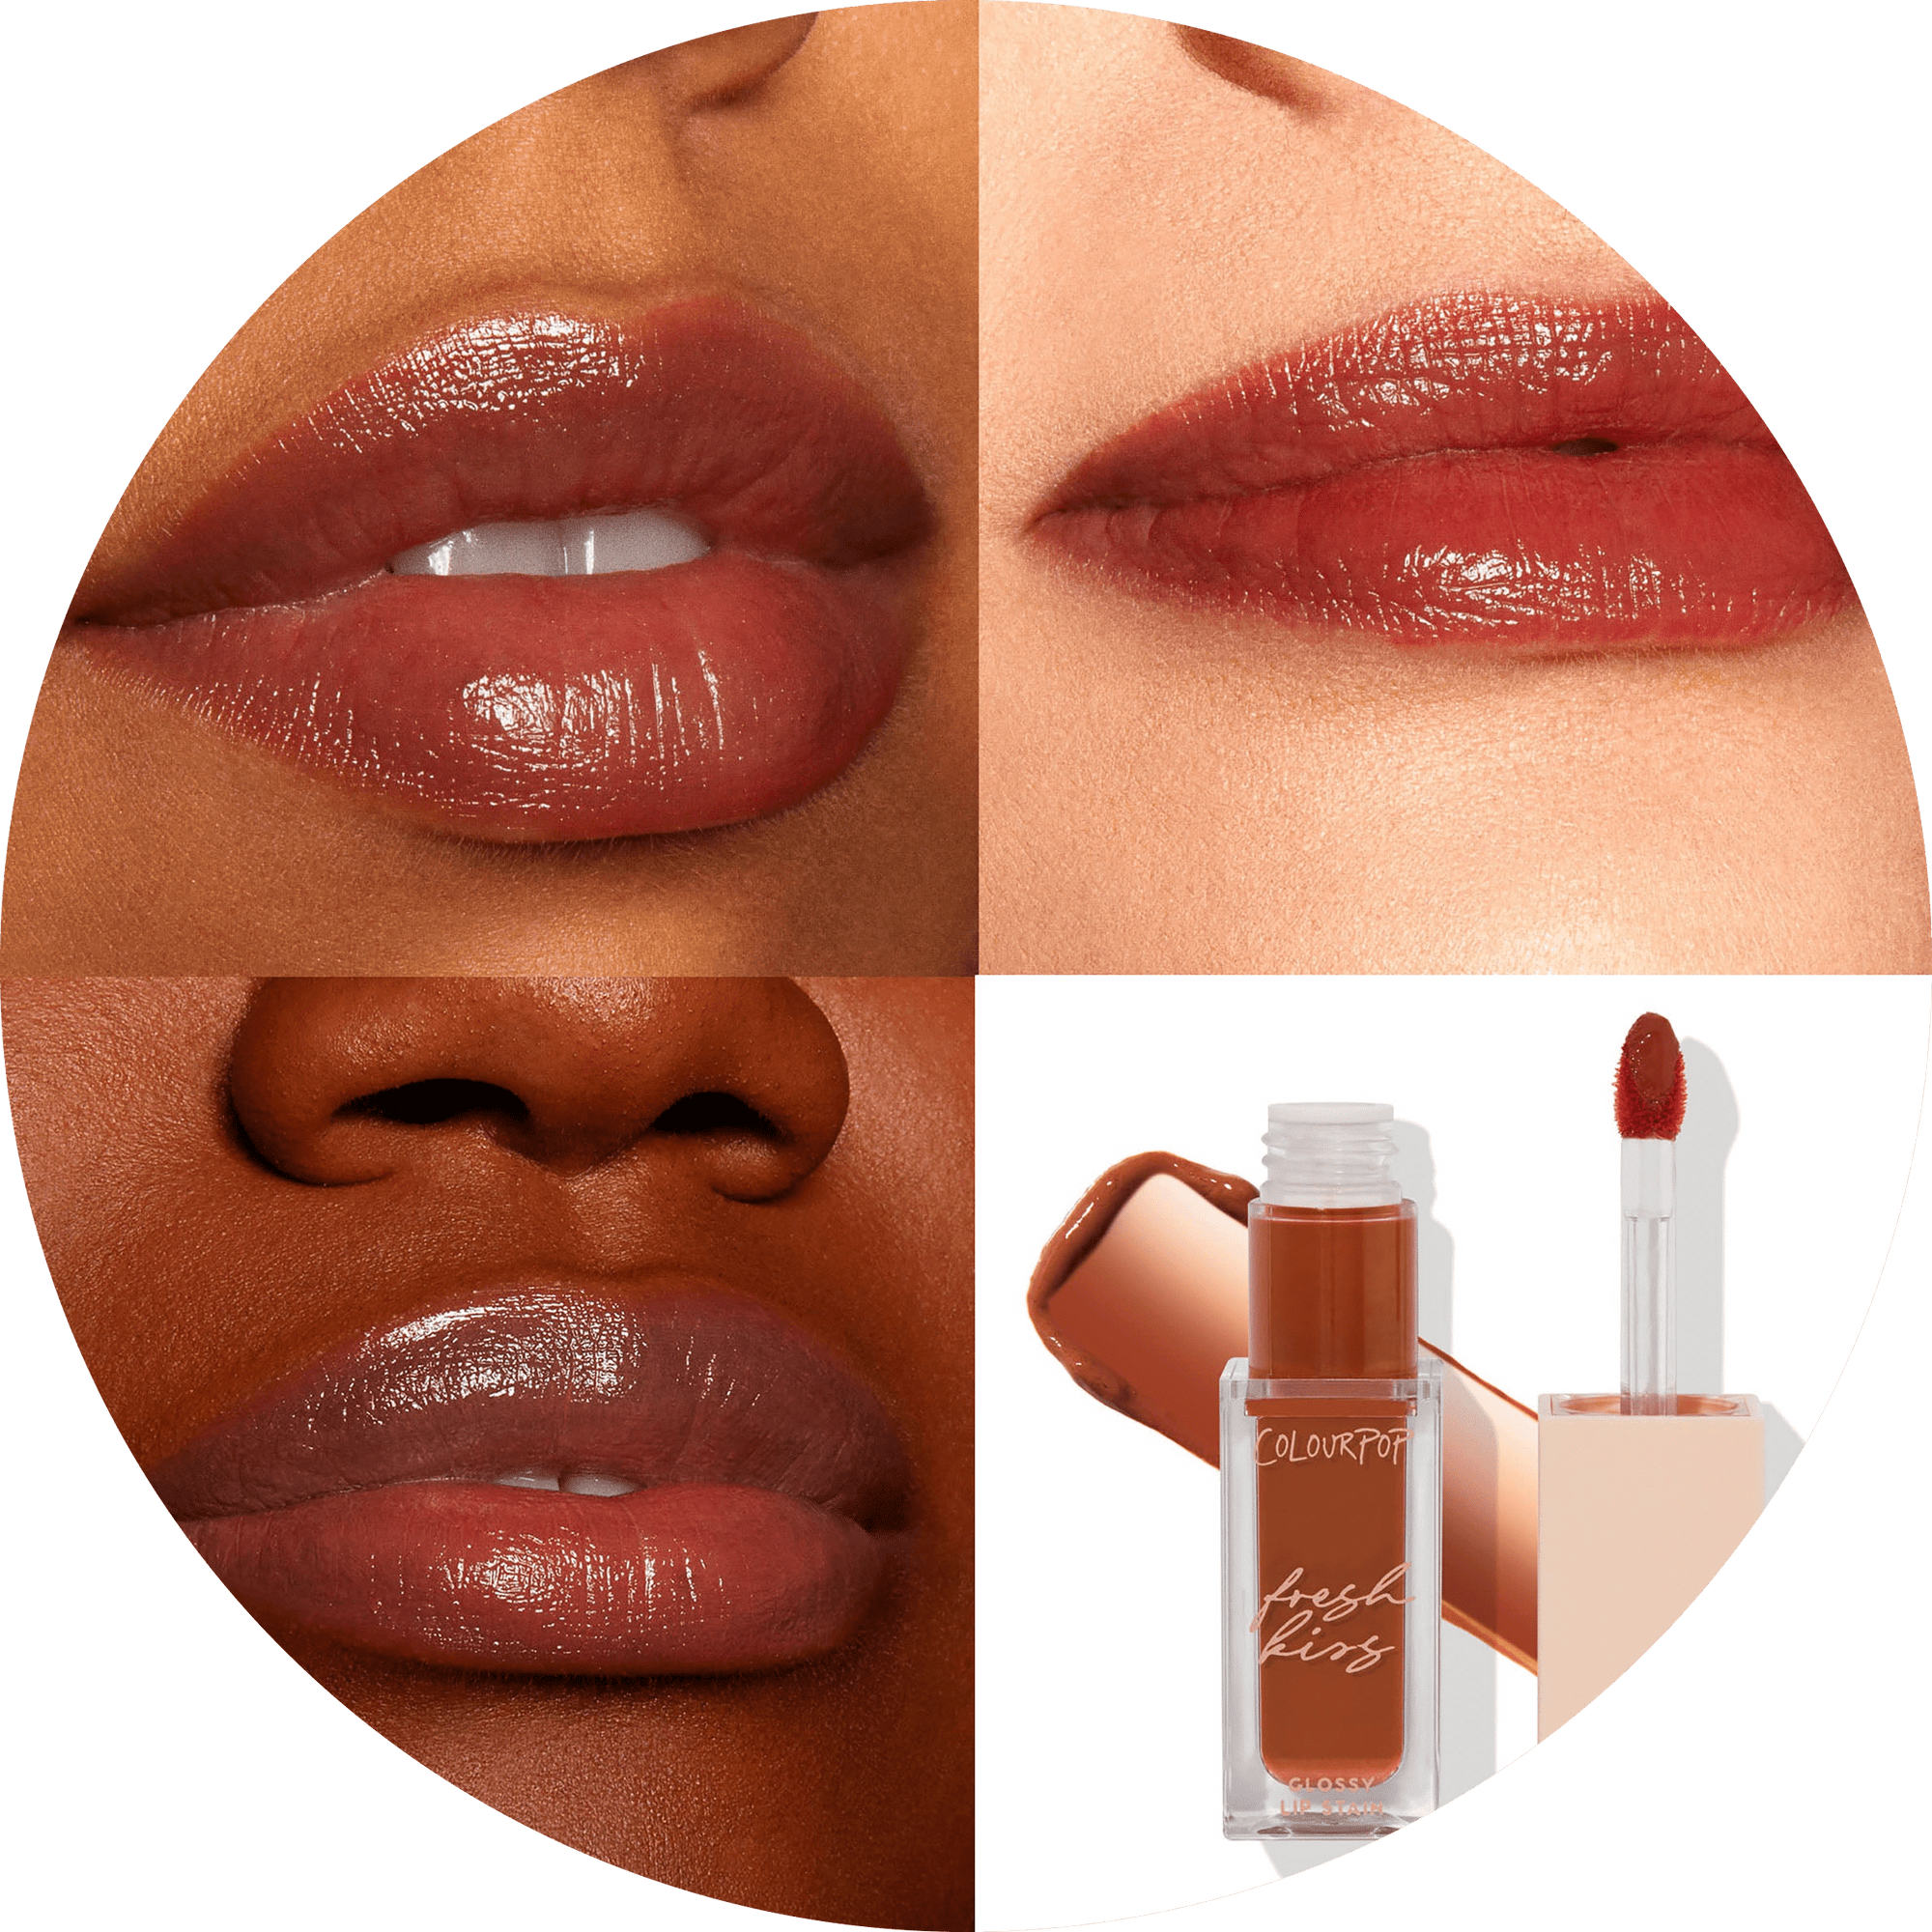 Fresh Kiss Lip Stain NudeFace Chile